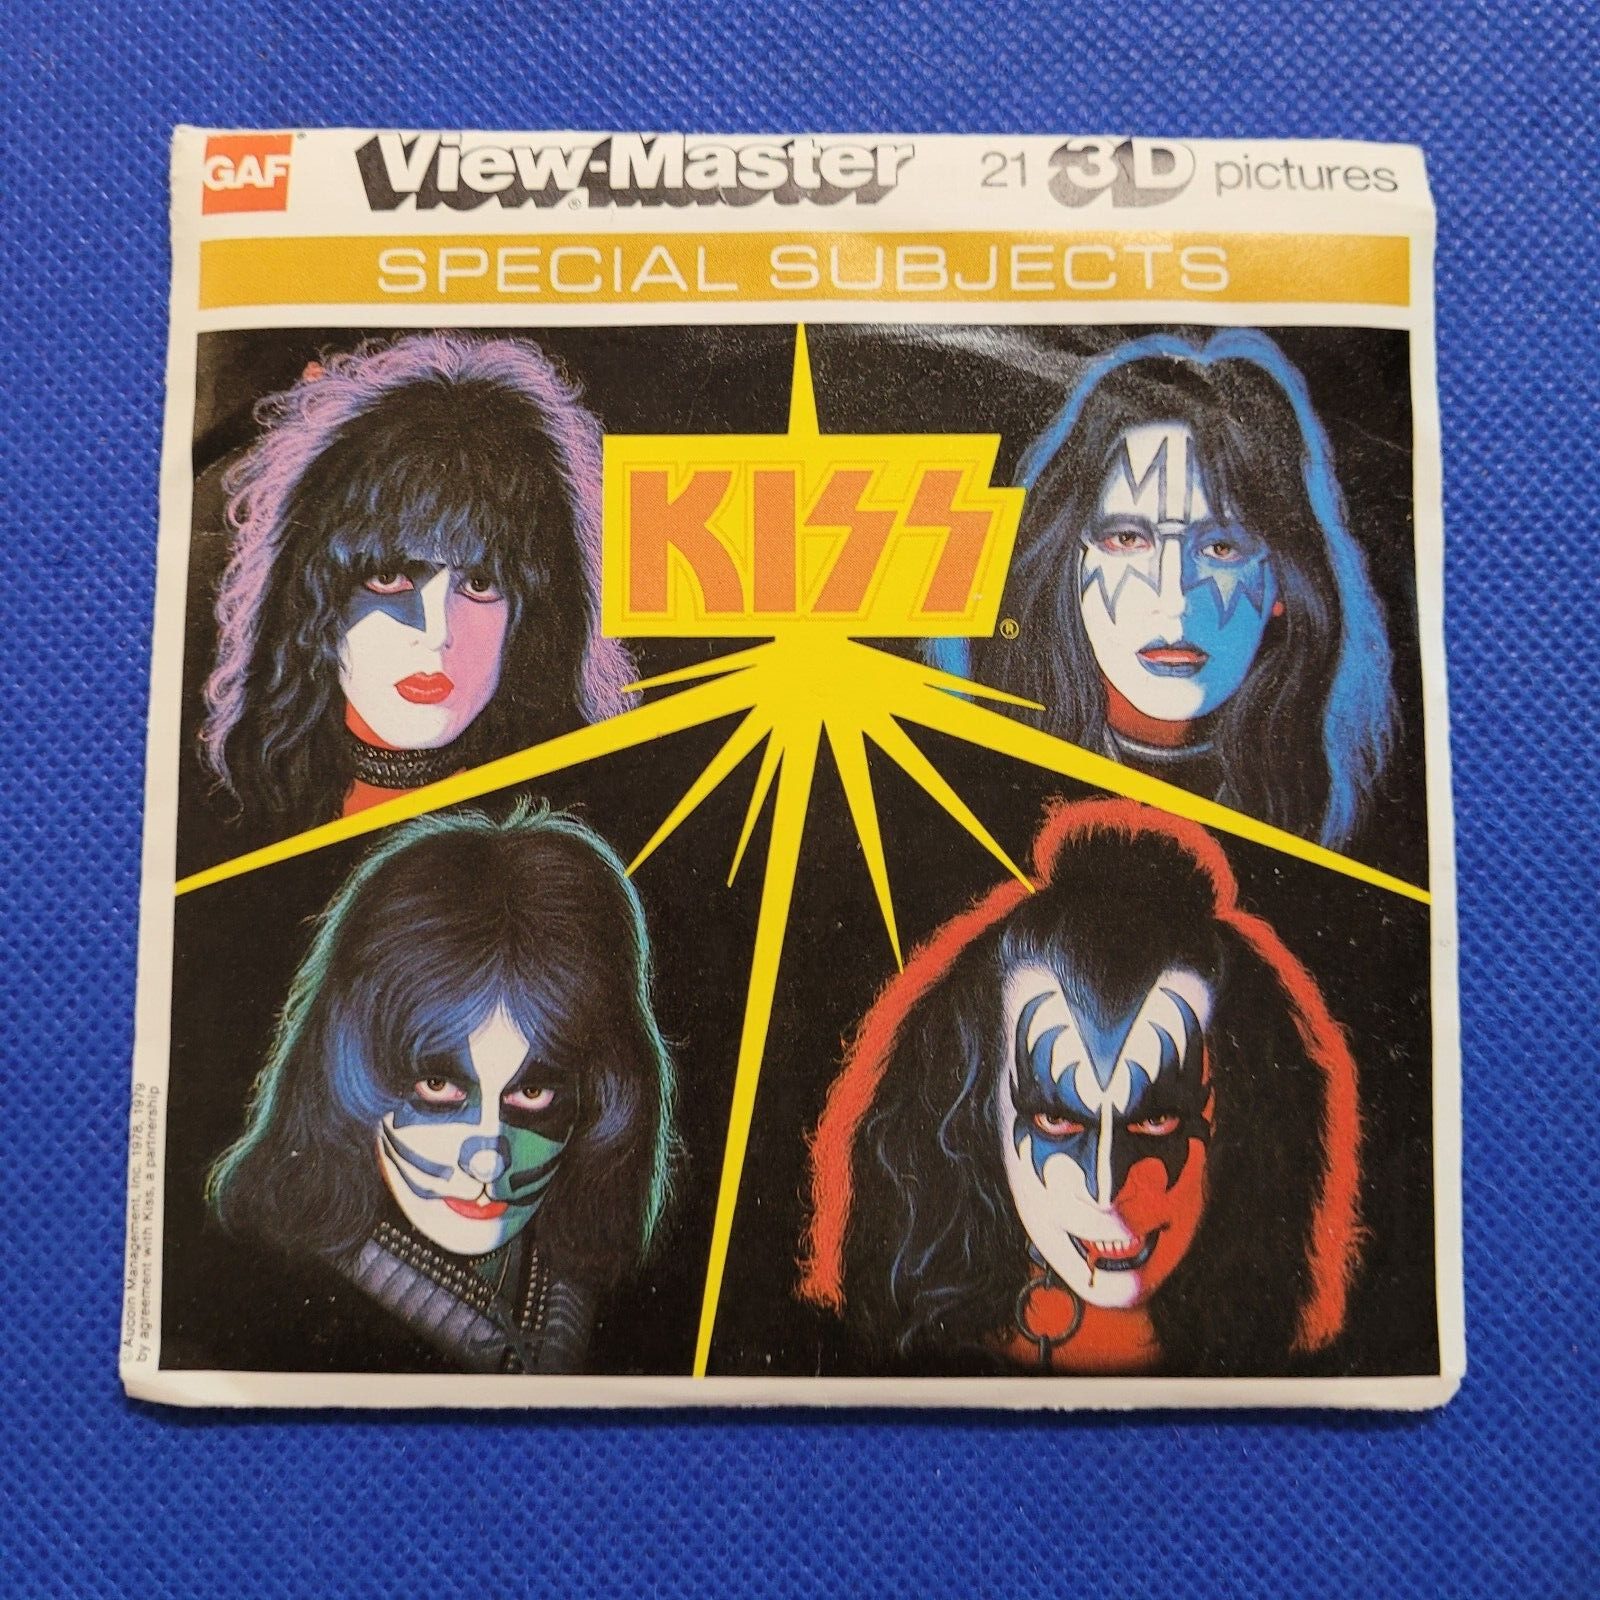 RARE gaf K71 KISS Rock Music Band Special view-master 3 Reels Packet Some Tones